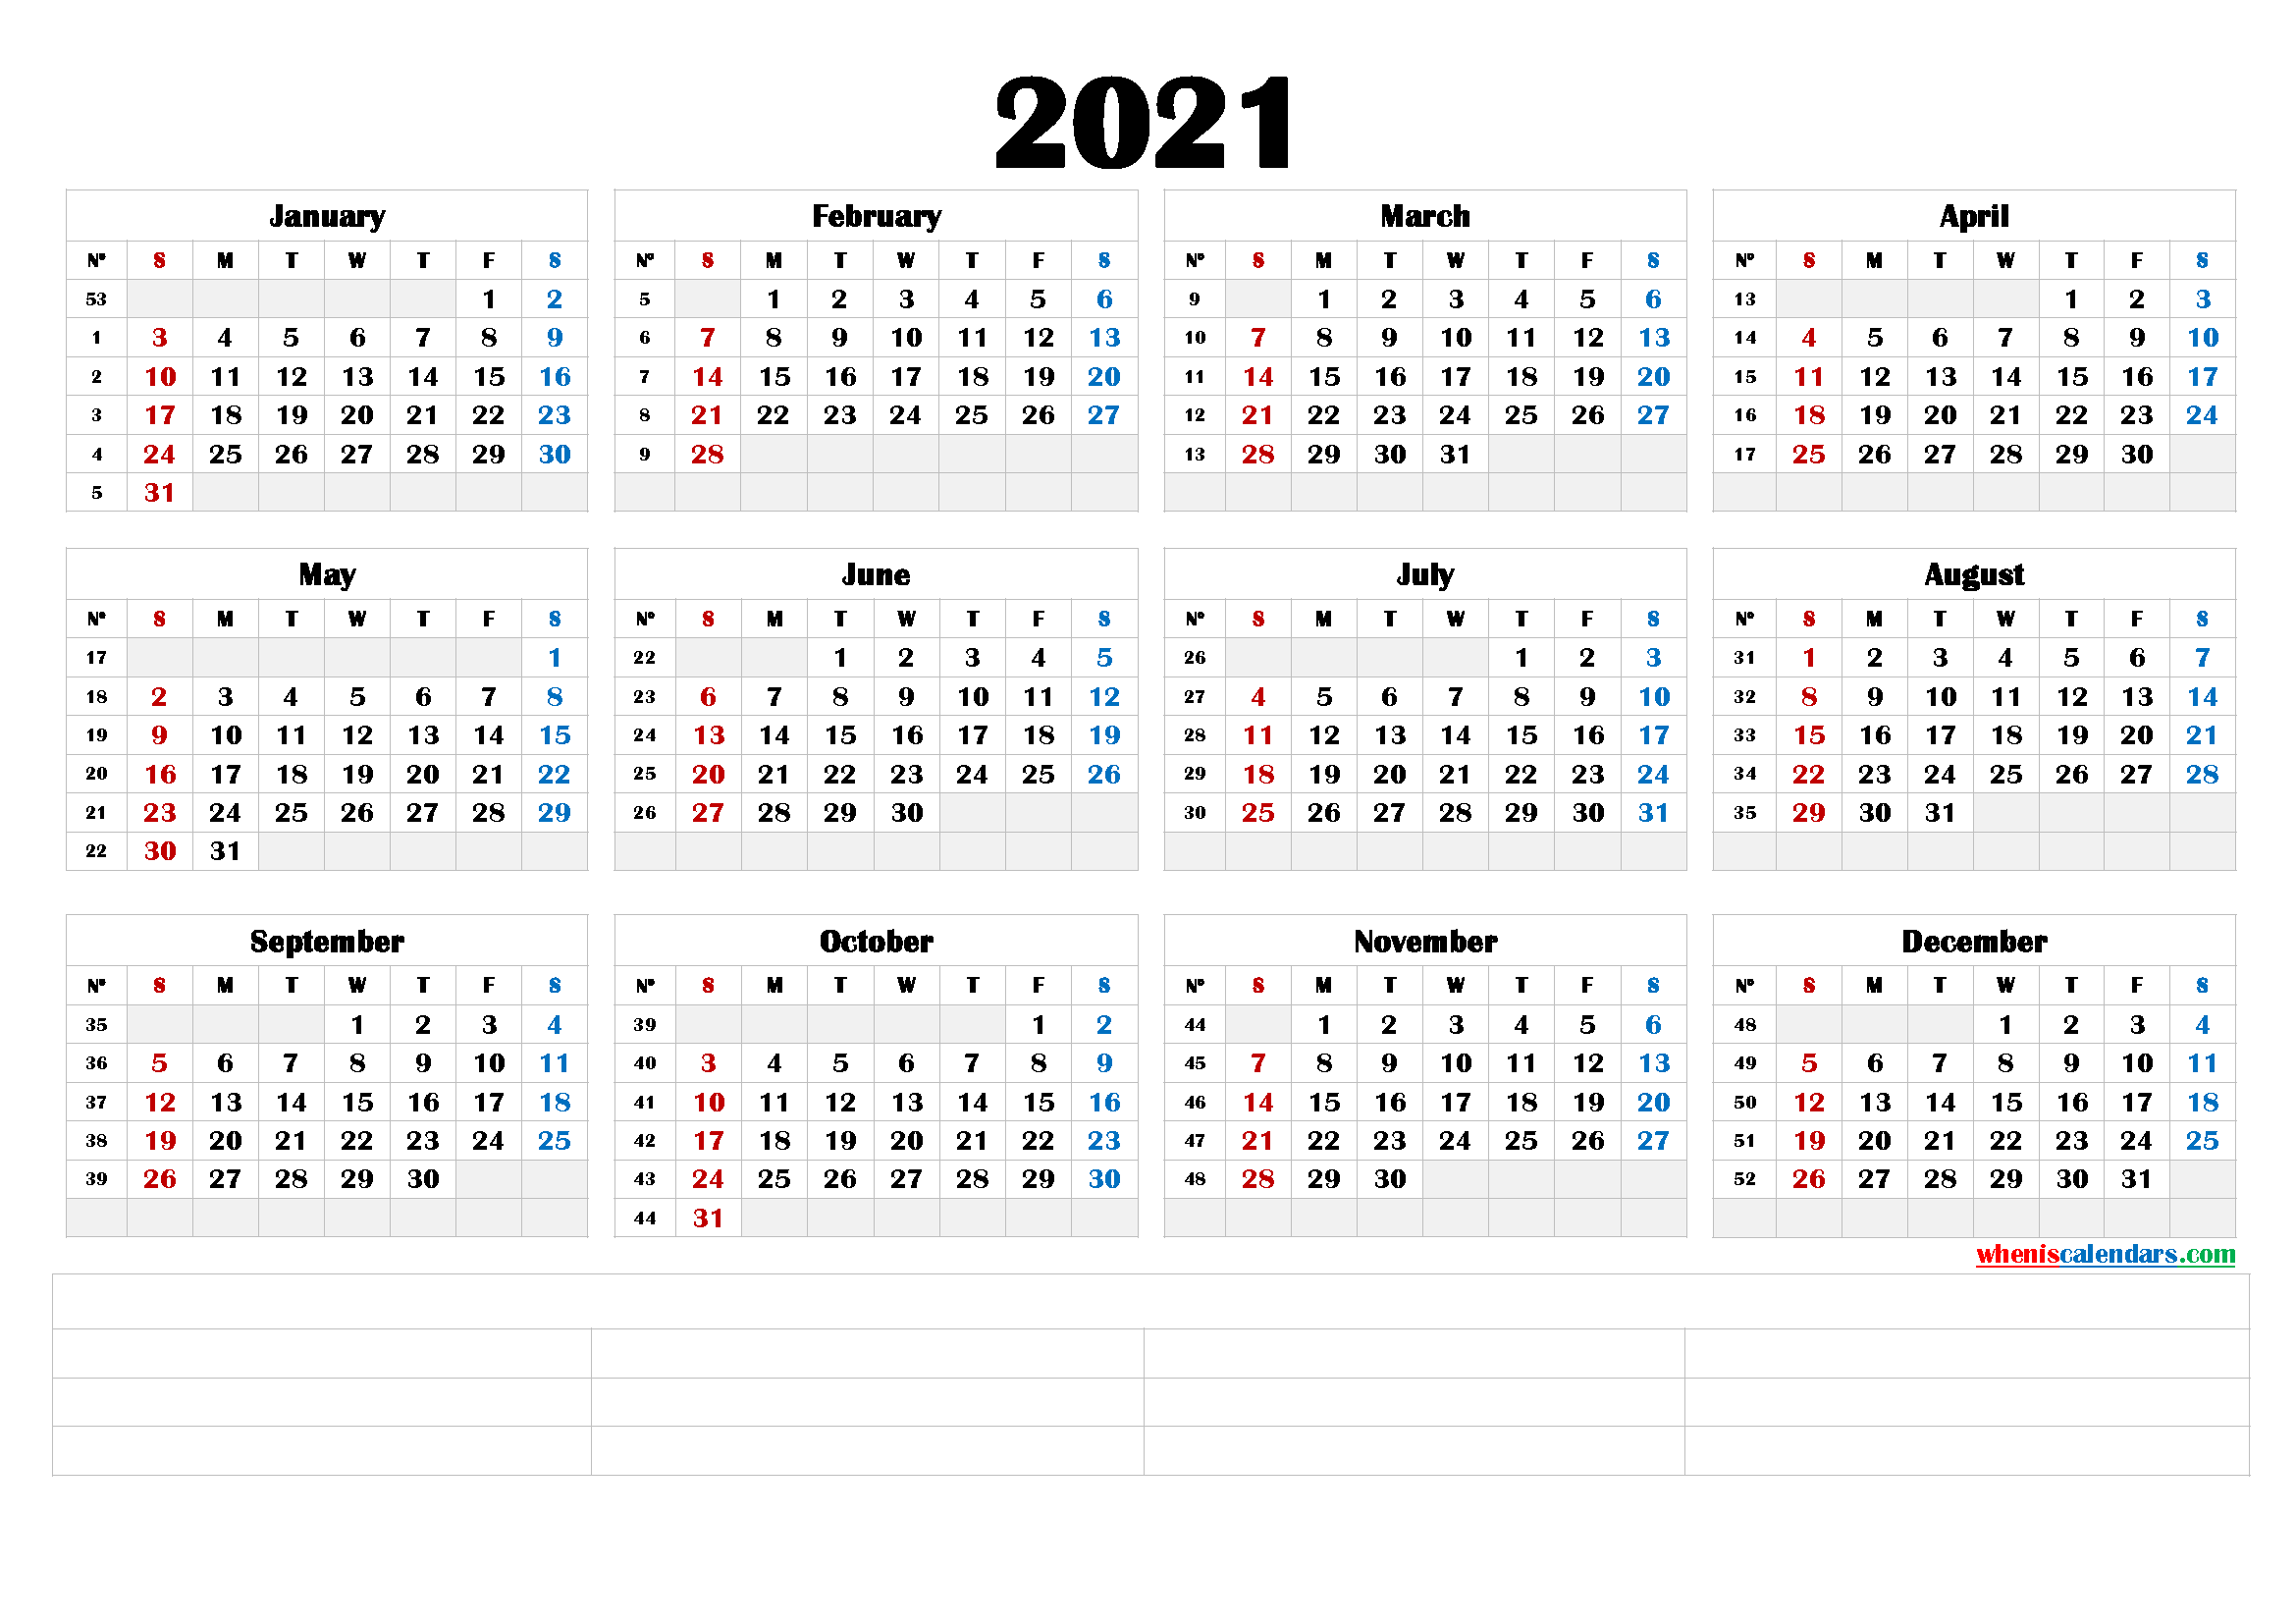 Free 2021 Yearly Calender Template - 24 Pretty Free ...